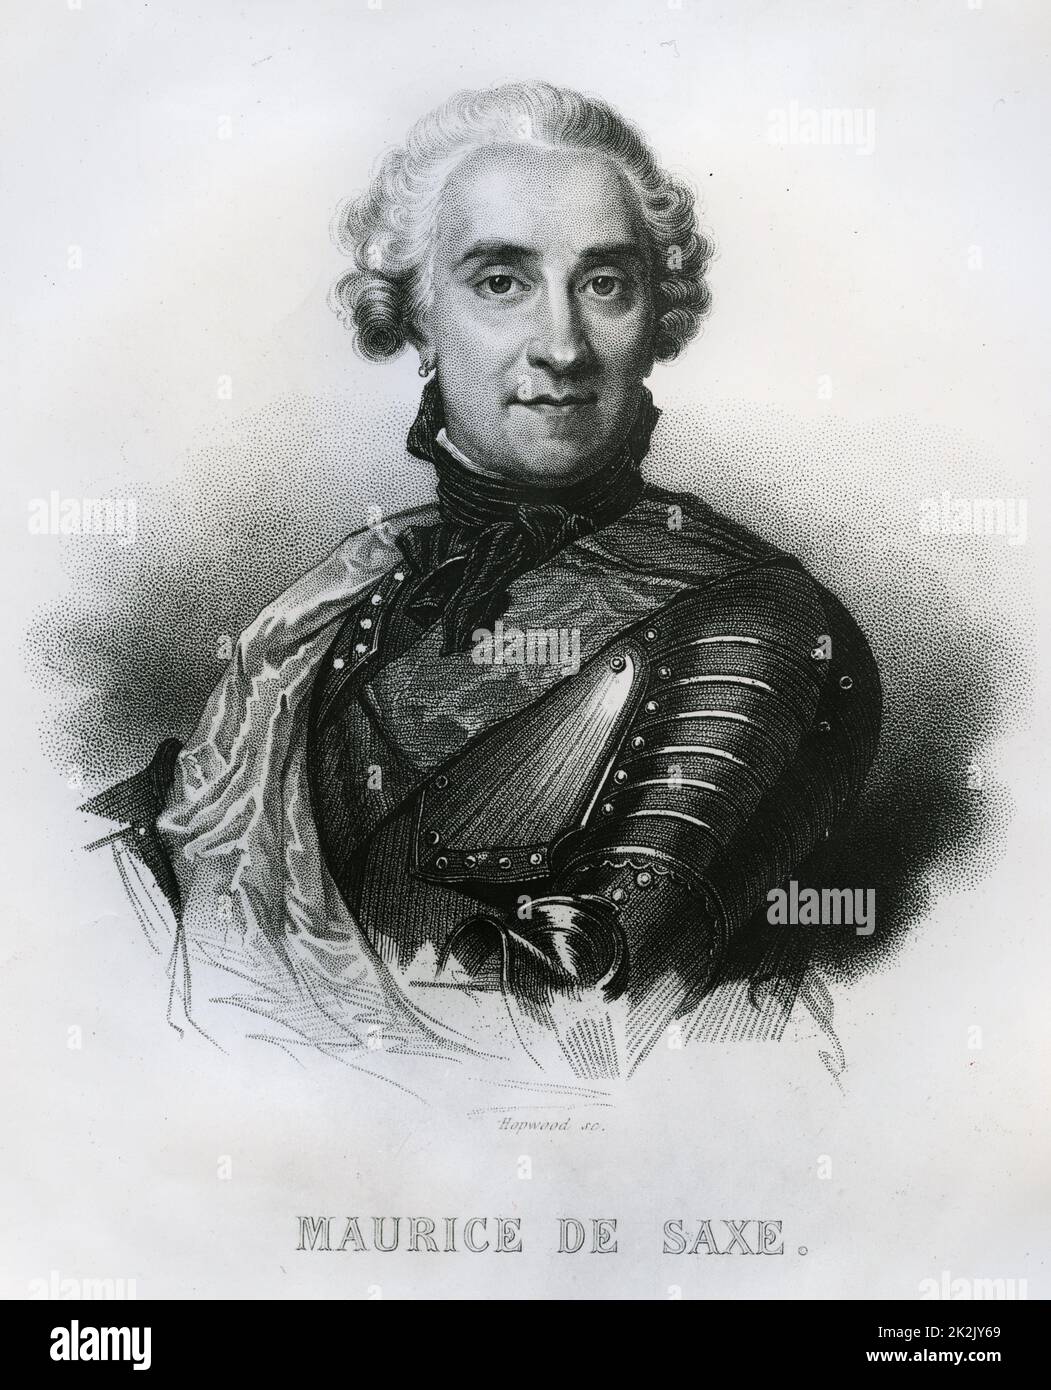 Maurice de Saxe (1696-1750): German soldier in the service of France. Stock Photo